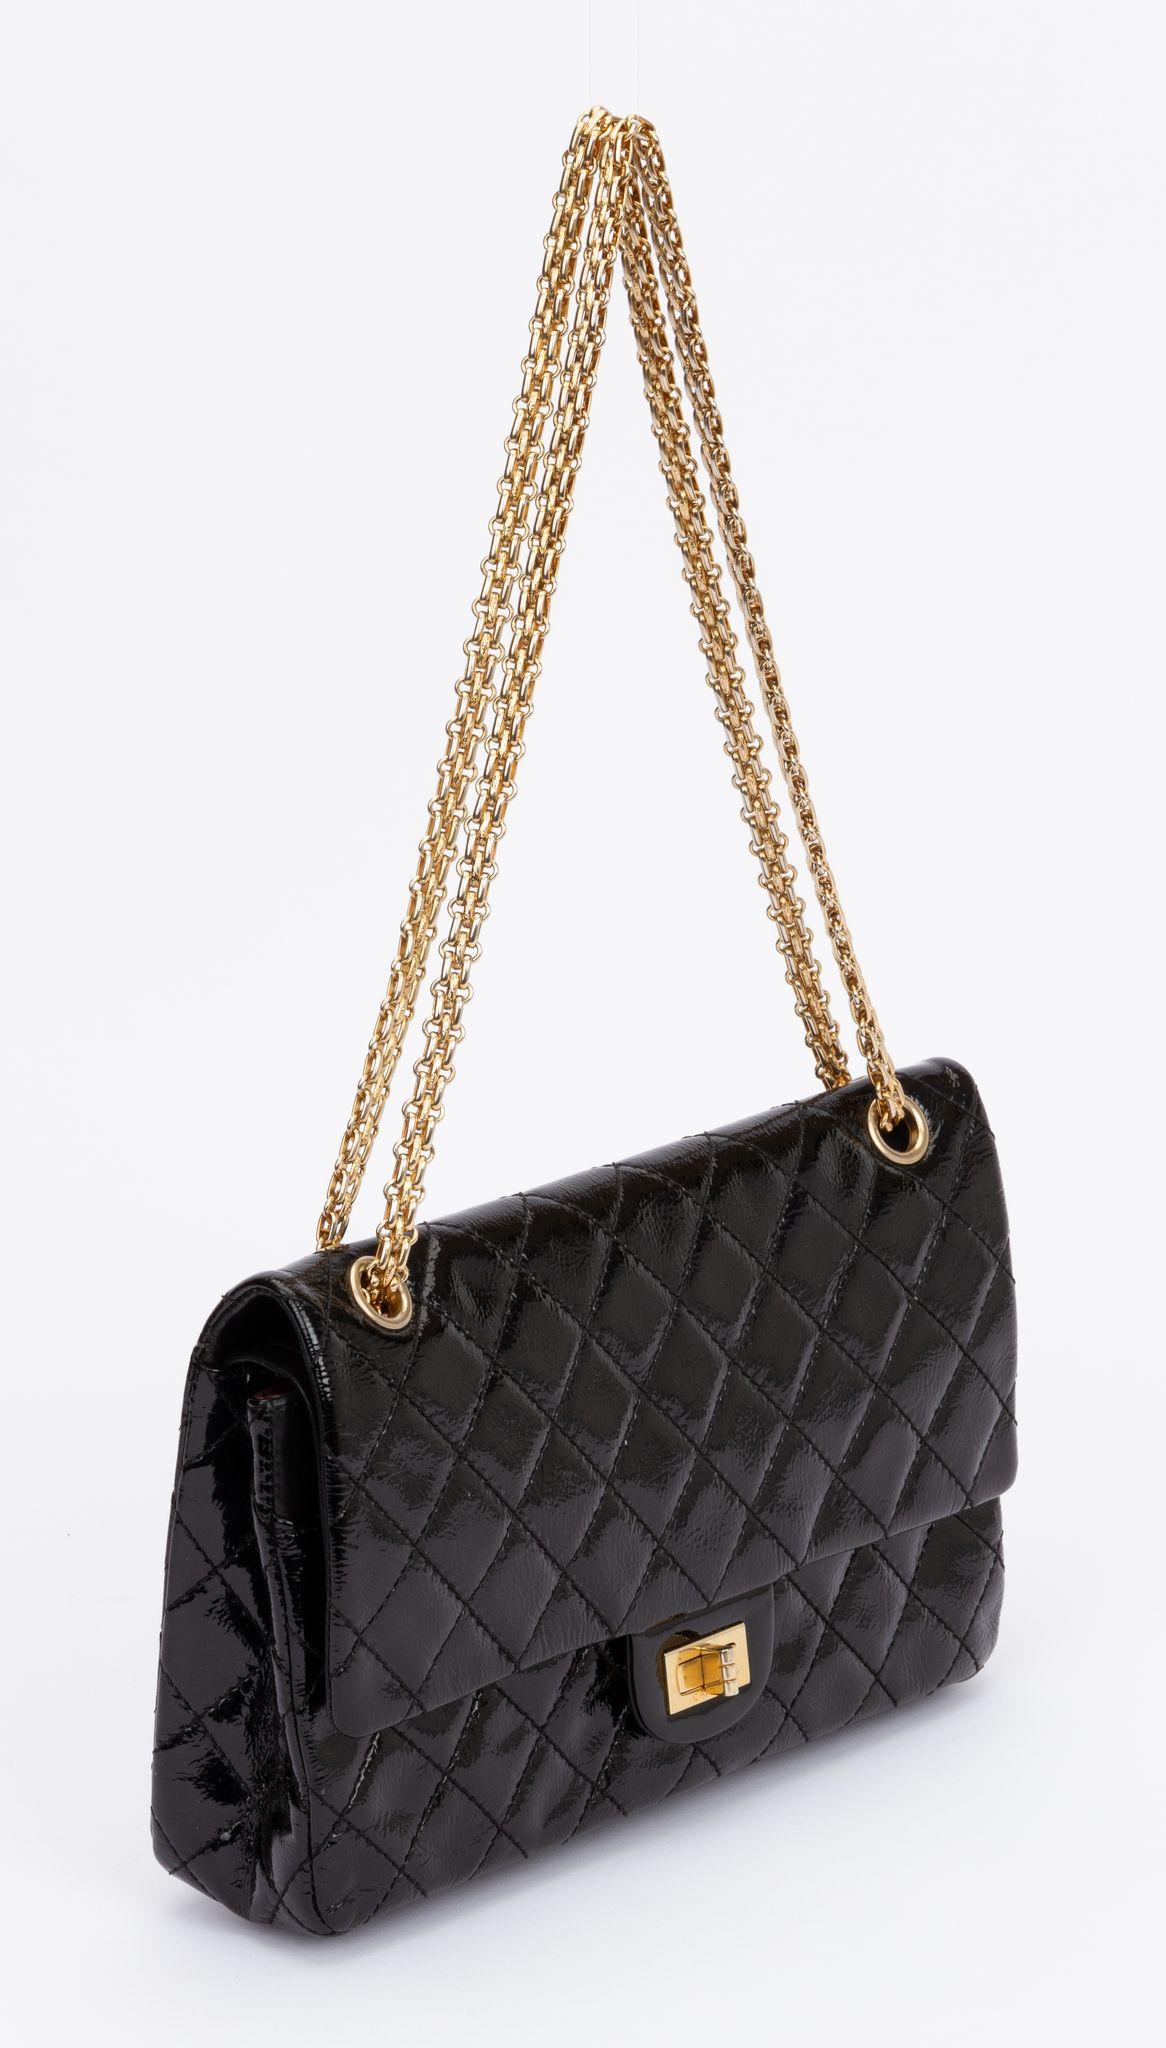 Chanel black patent leather medium reissue double flap with gold tone hardware. Shoulder strap drop 8